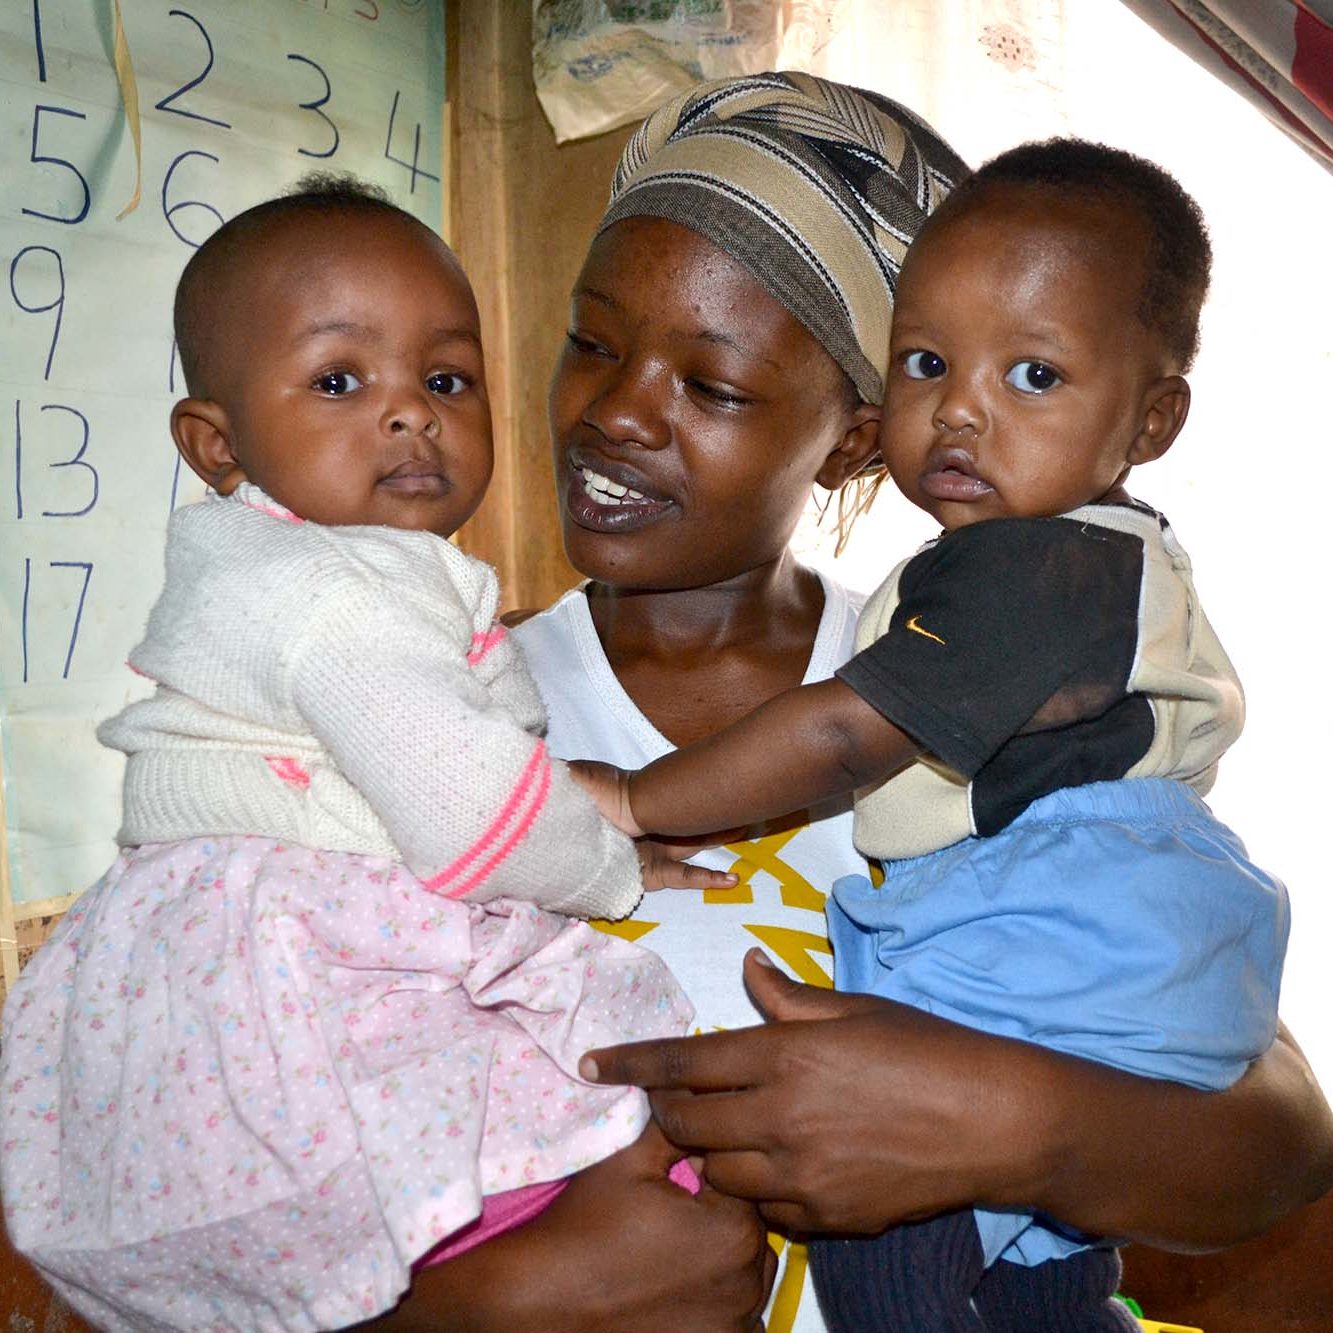 A Kenyan woman holds two babies in a classroom.